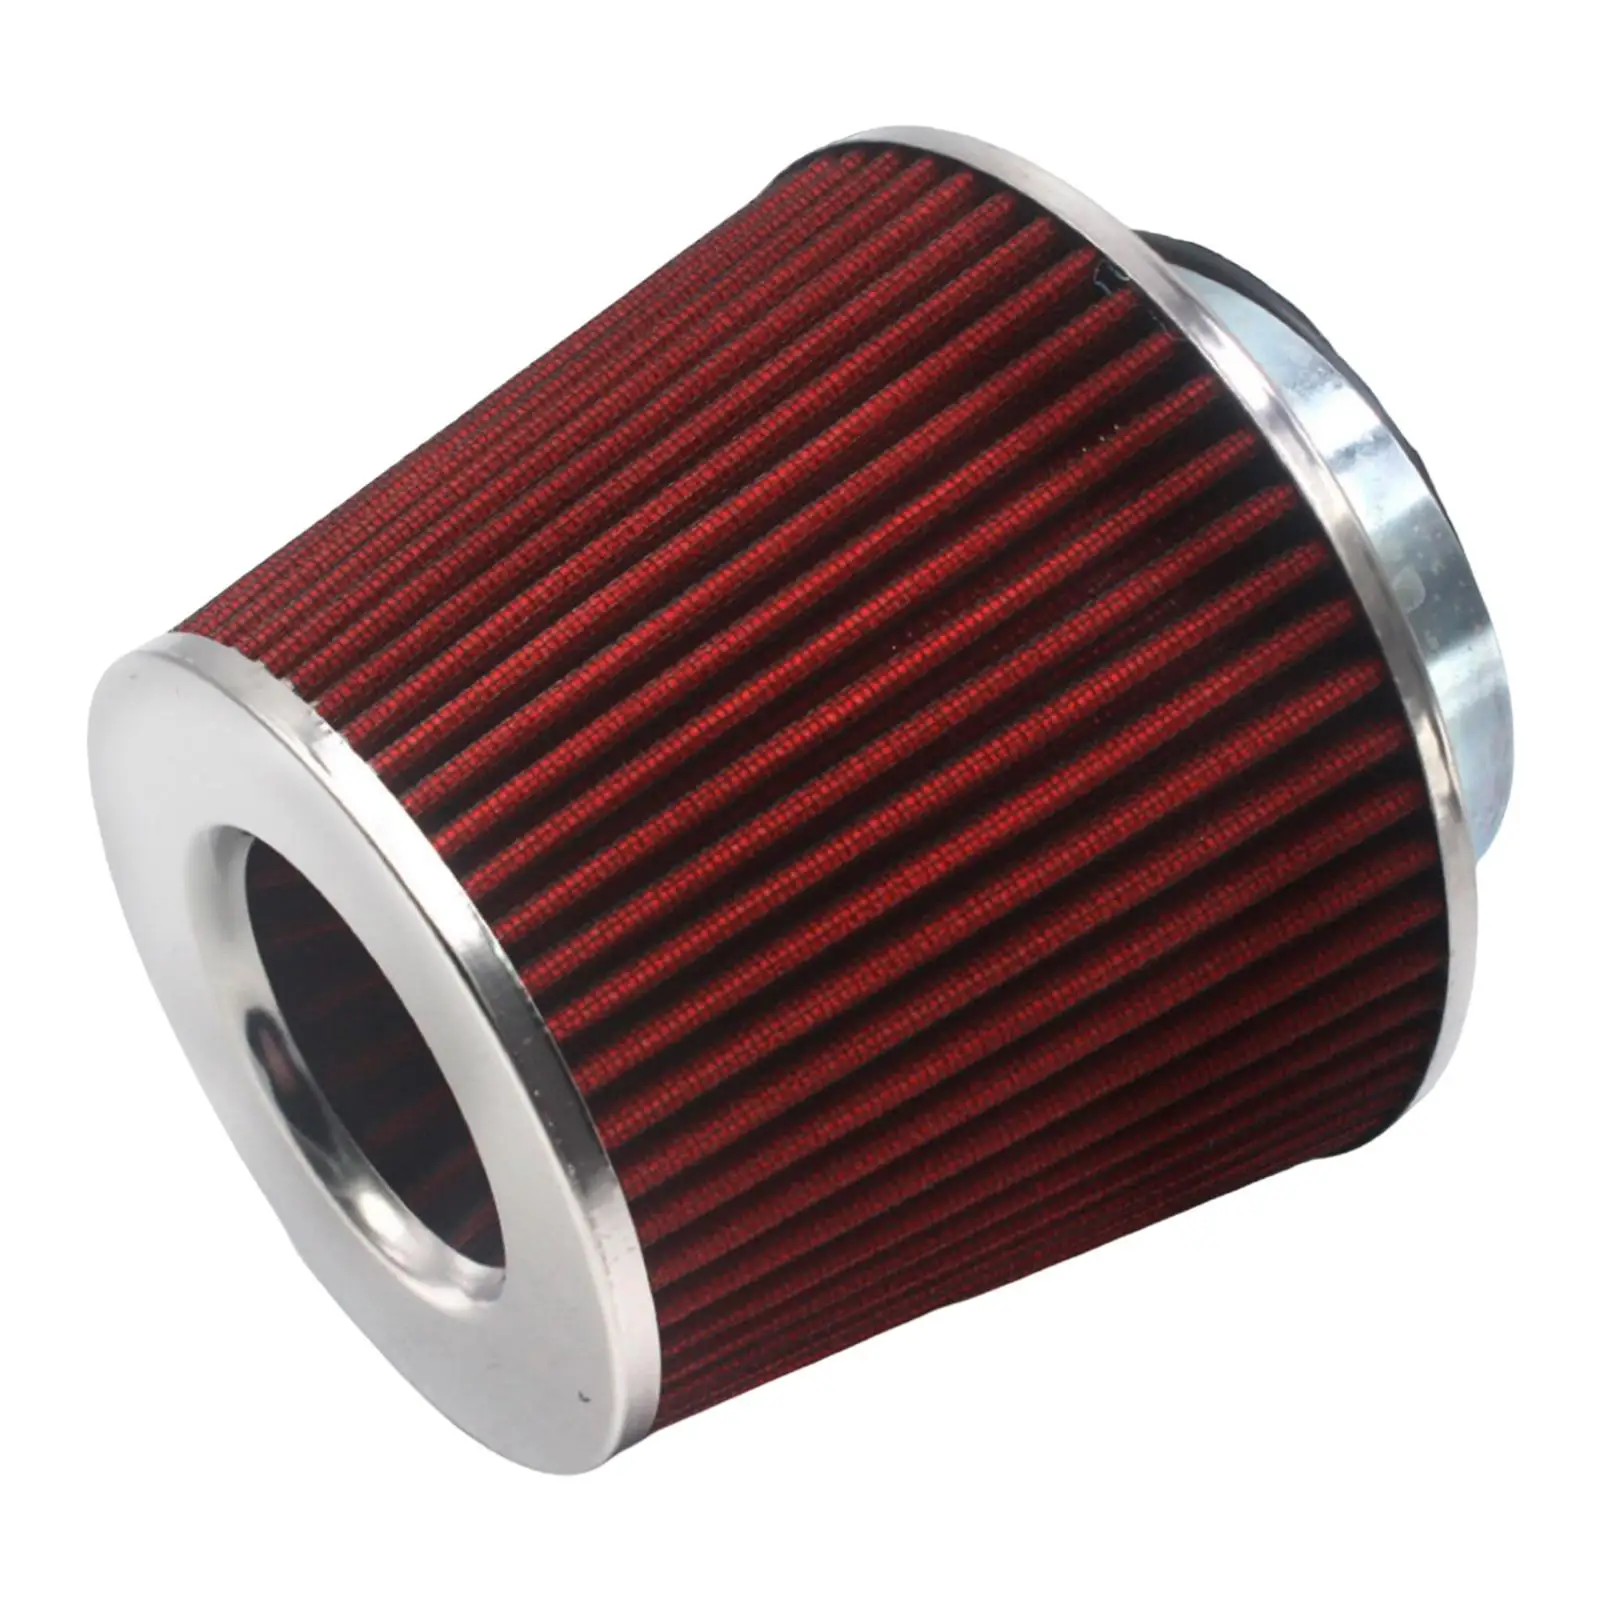 90mm Mushroom Head Air Filter Automobile Parts Round Cone Refitting Car Supplies Auto Parts Modified High Flow Intake Air Filter